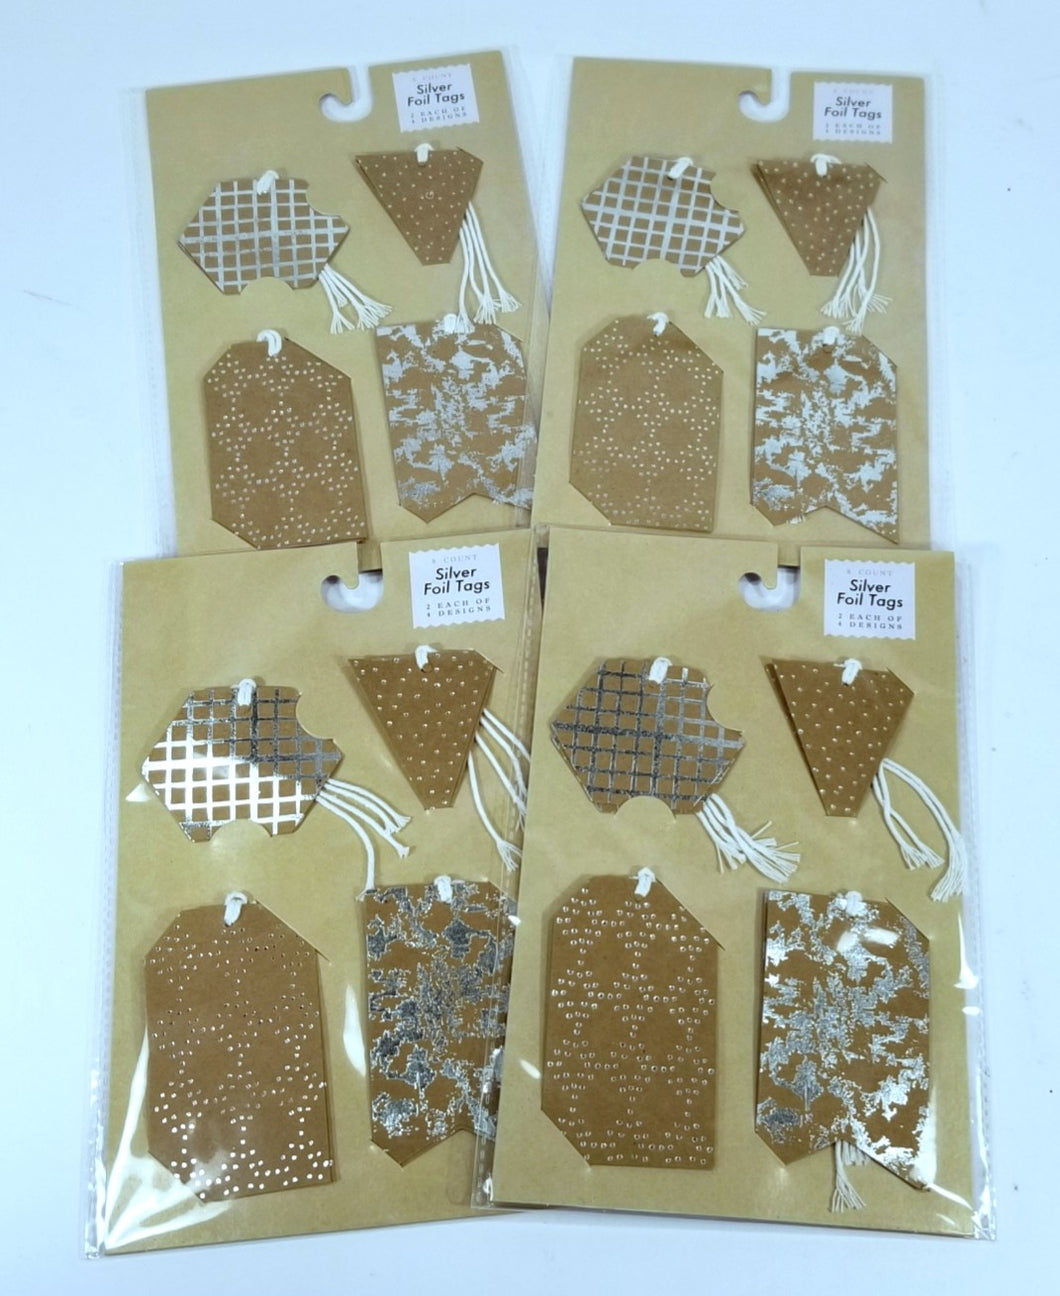 4 Packs of 8 Count - Silver Foil Gift Tags, 2 Each of 4 Designs